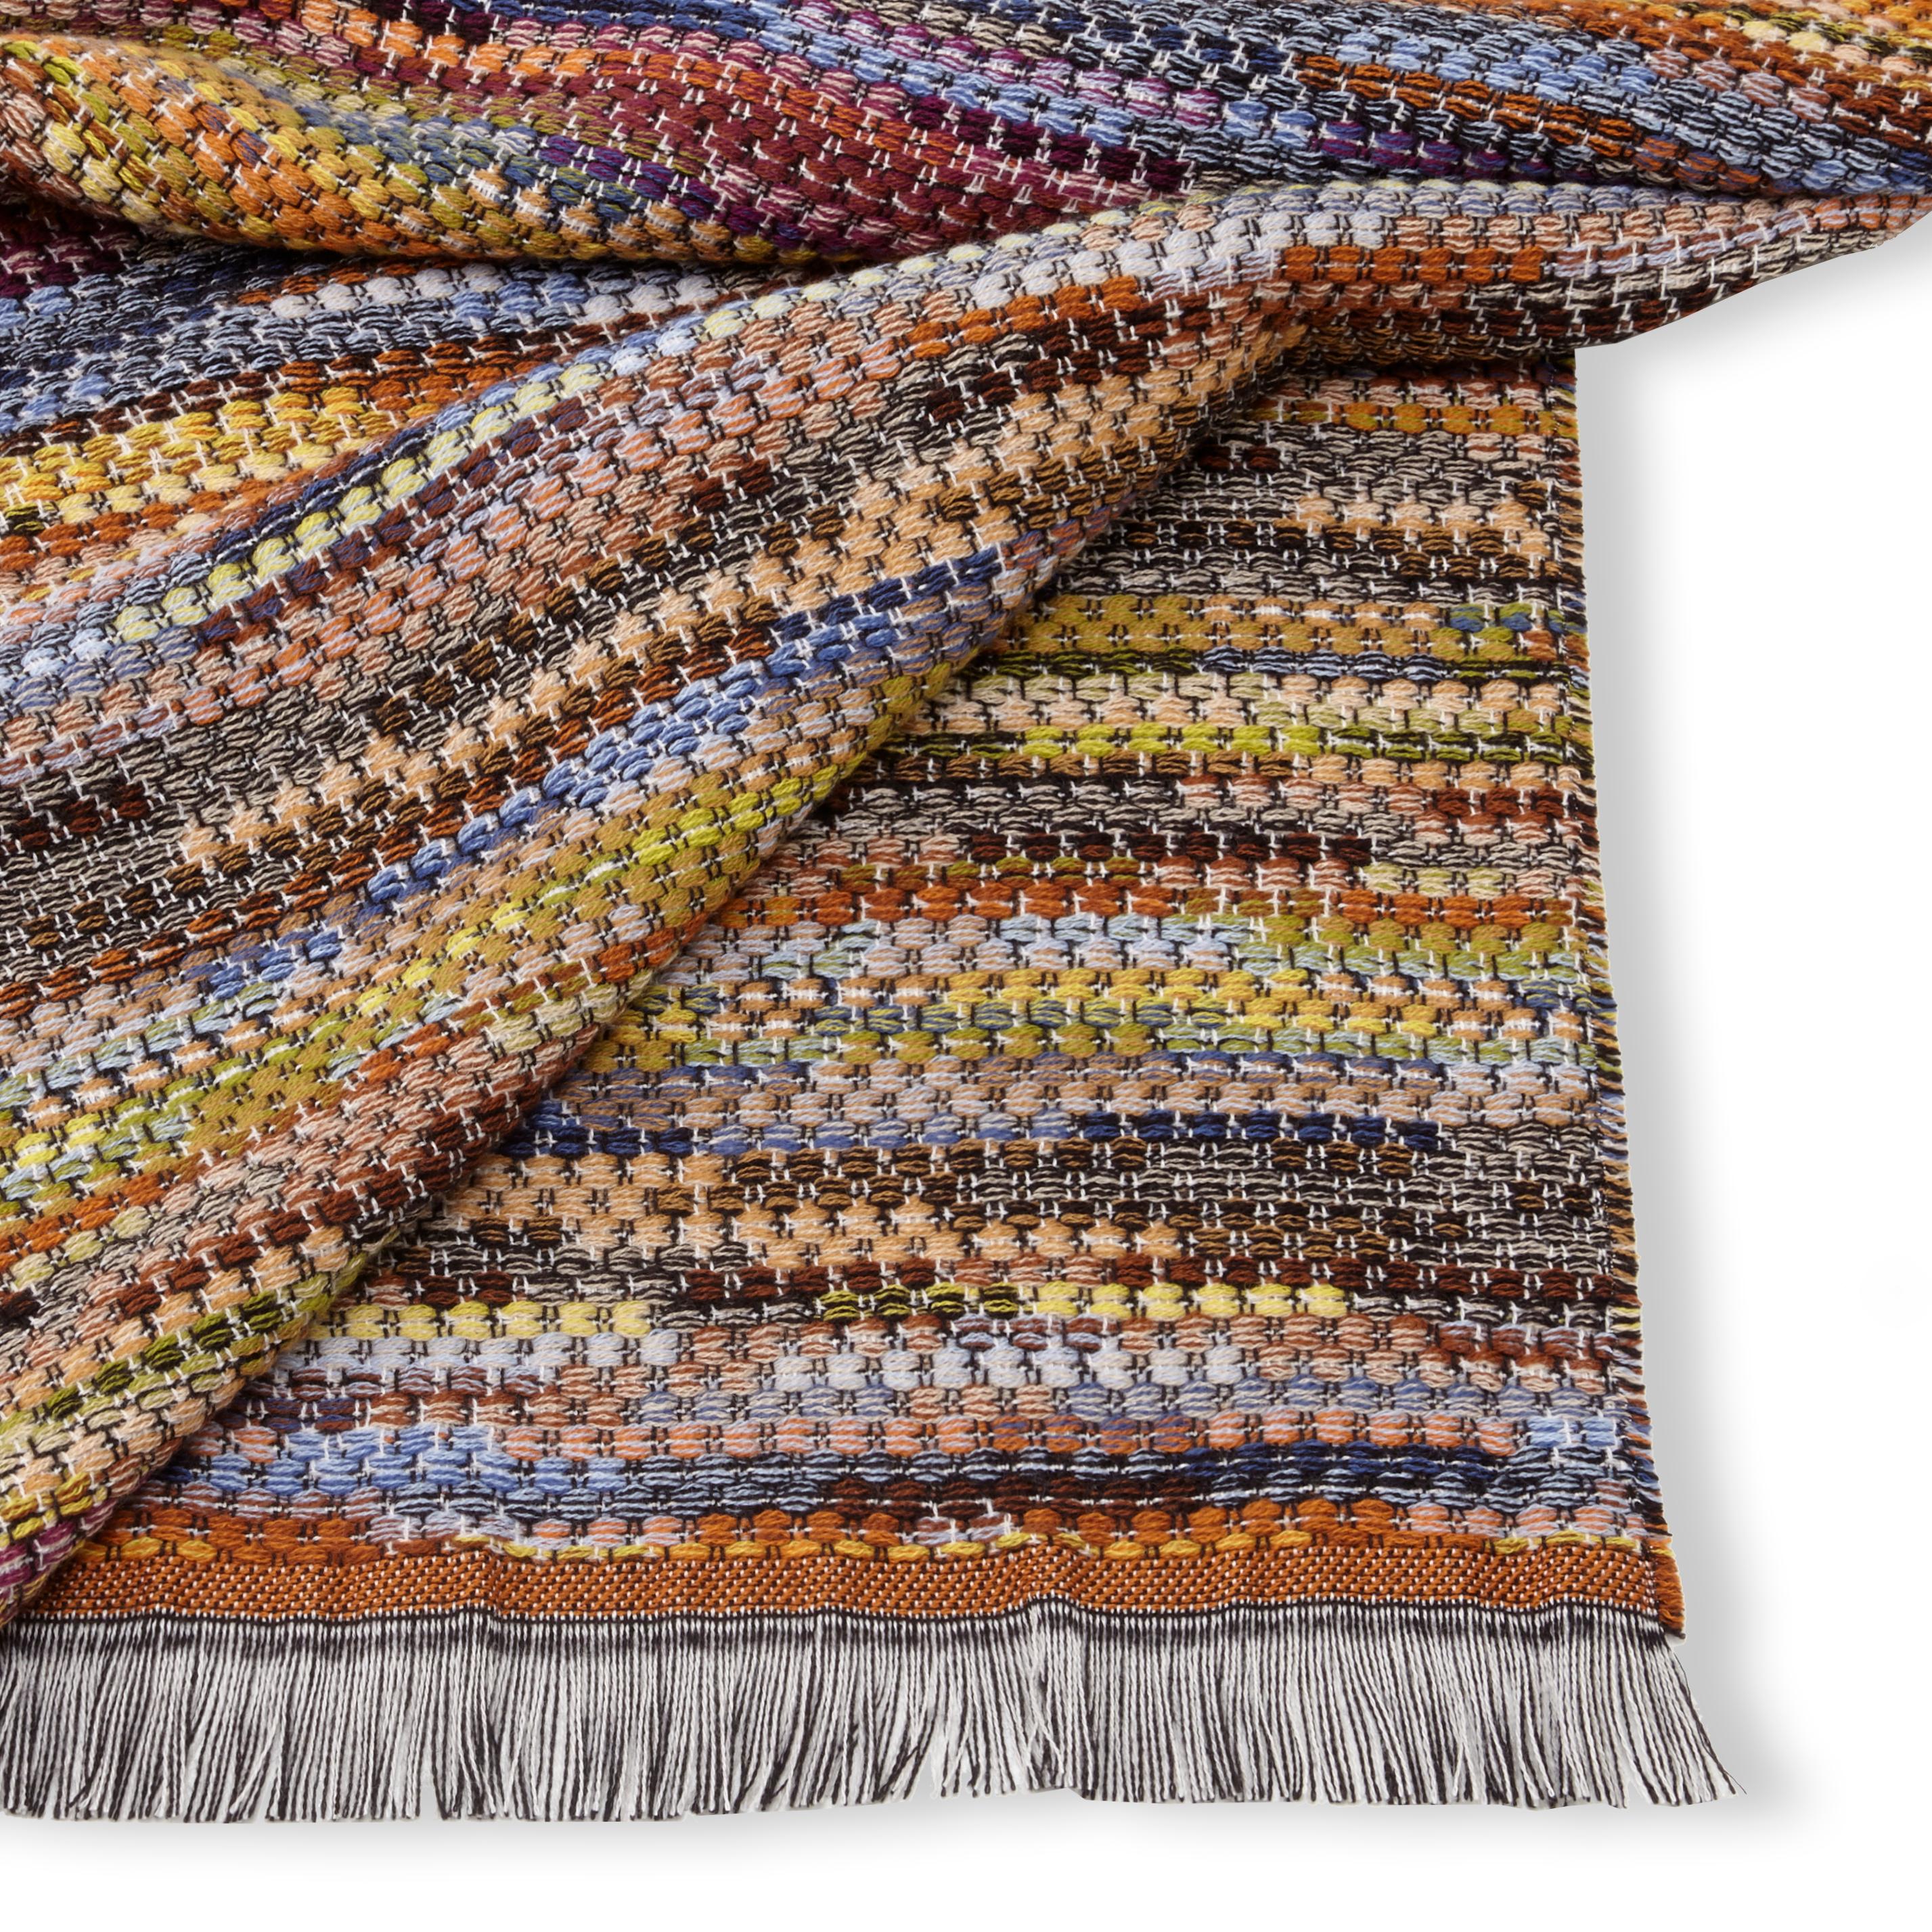 Missoni Home iconic multi-colored woven throw in a flame stitch design. All Missoni Home products are custom made to order with the highest quality materials. Perfect for adding an elegant touch to any bedroom or living room.

Composition: 50%